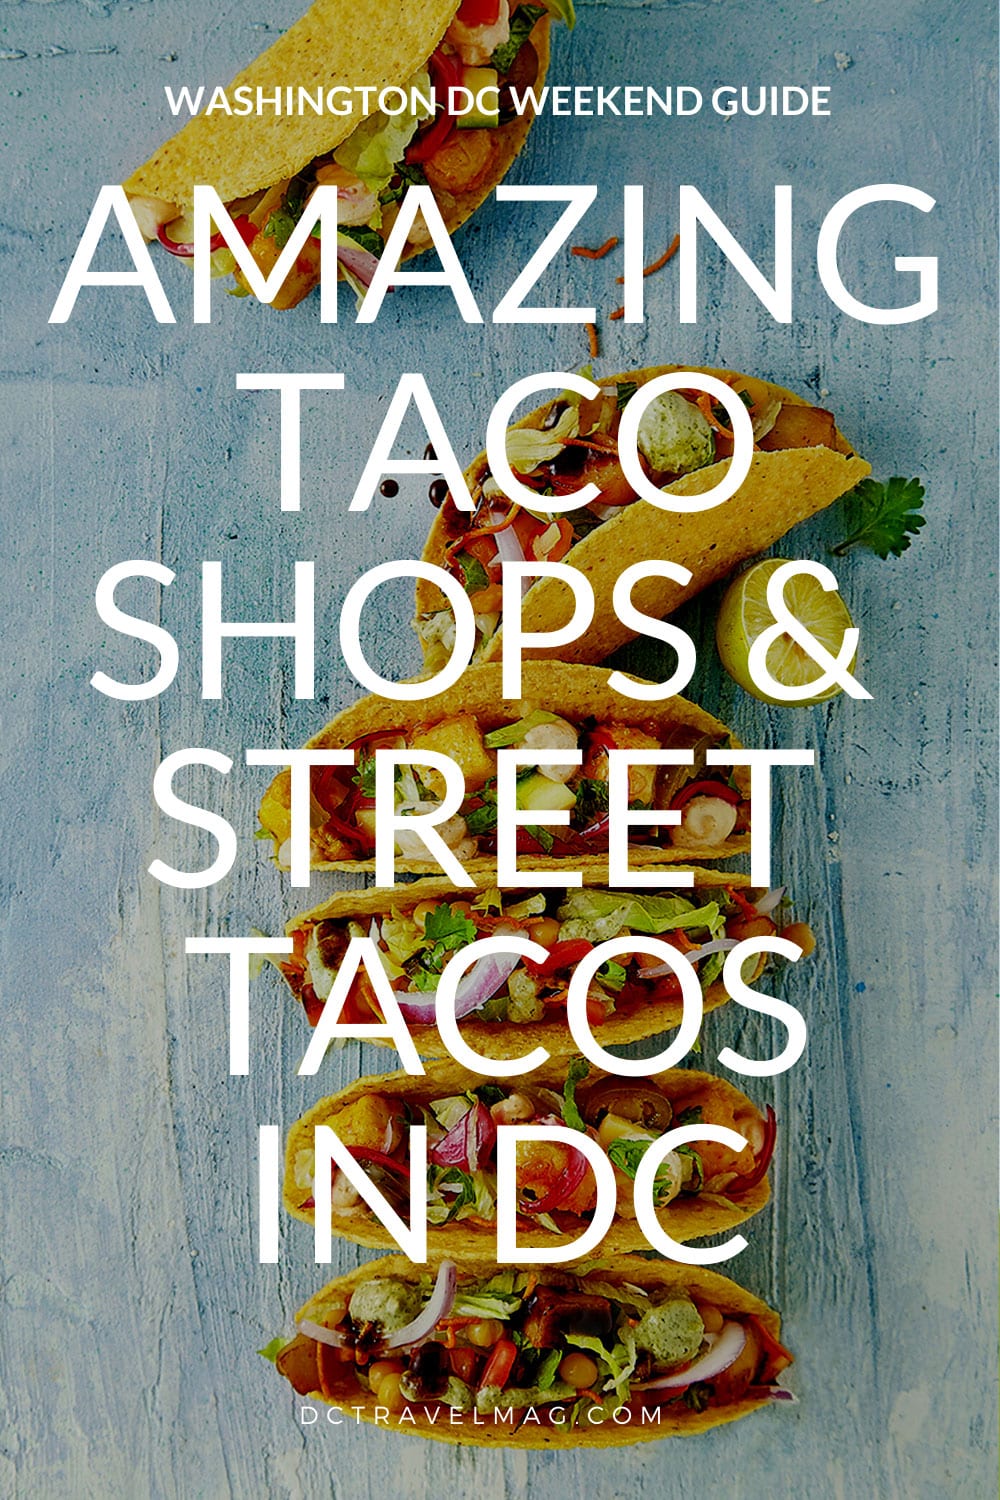 15+ Amazing BEST TACOS In DC & Street Tacos Near Me- photo credit Keryn Means publisher of DCTravelMag.com